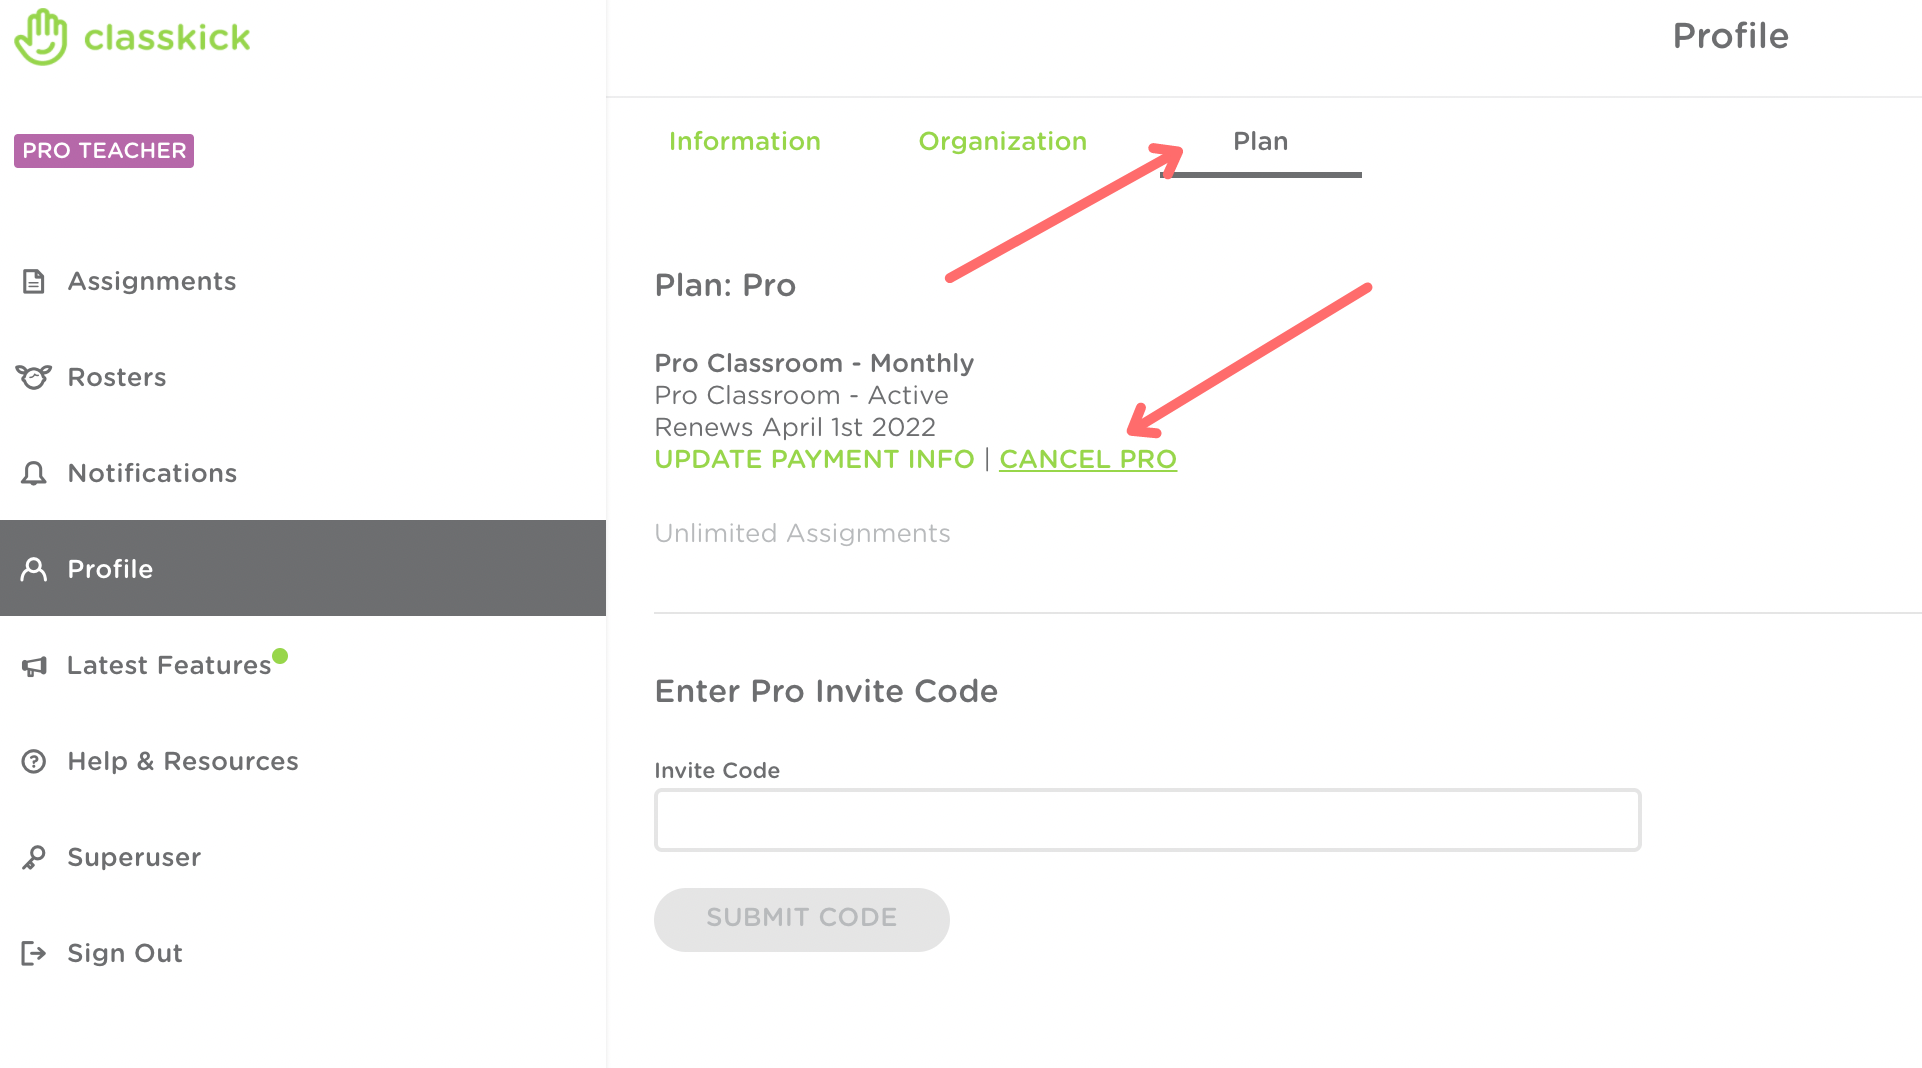 A red arrow points to Plan, underlined in gray, at the top of the page. Another red arrow points to CANCEL PRO within the page.